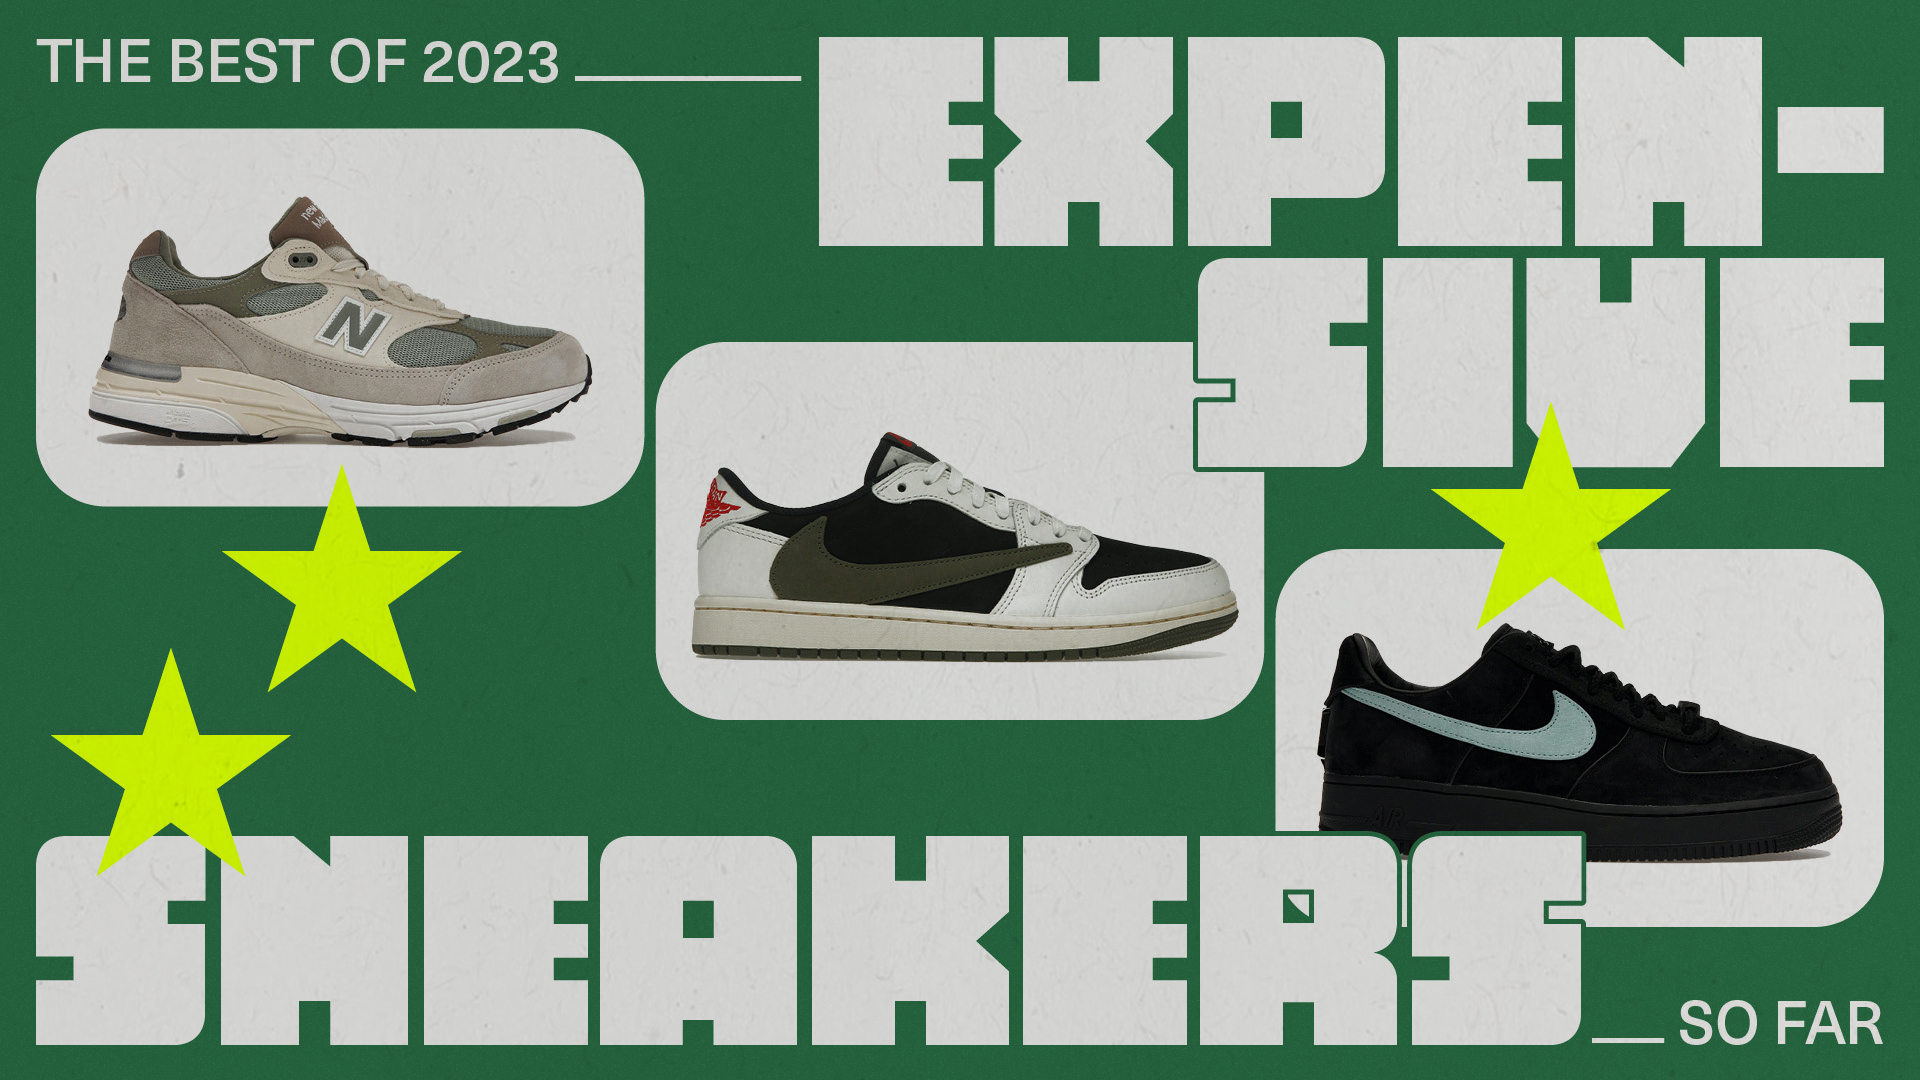 Most Expensive Sneakers So Far 2023